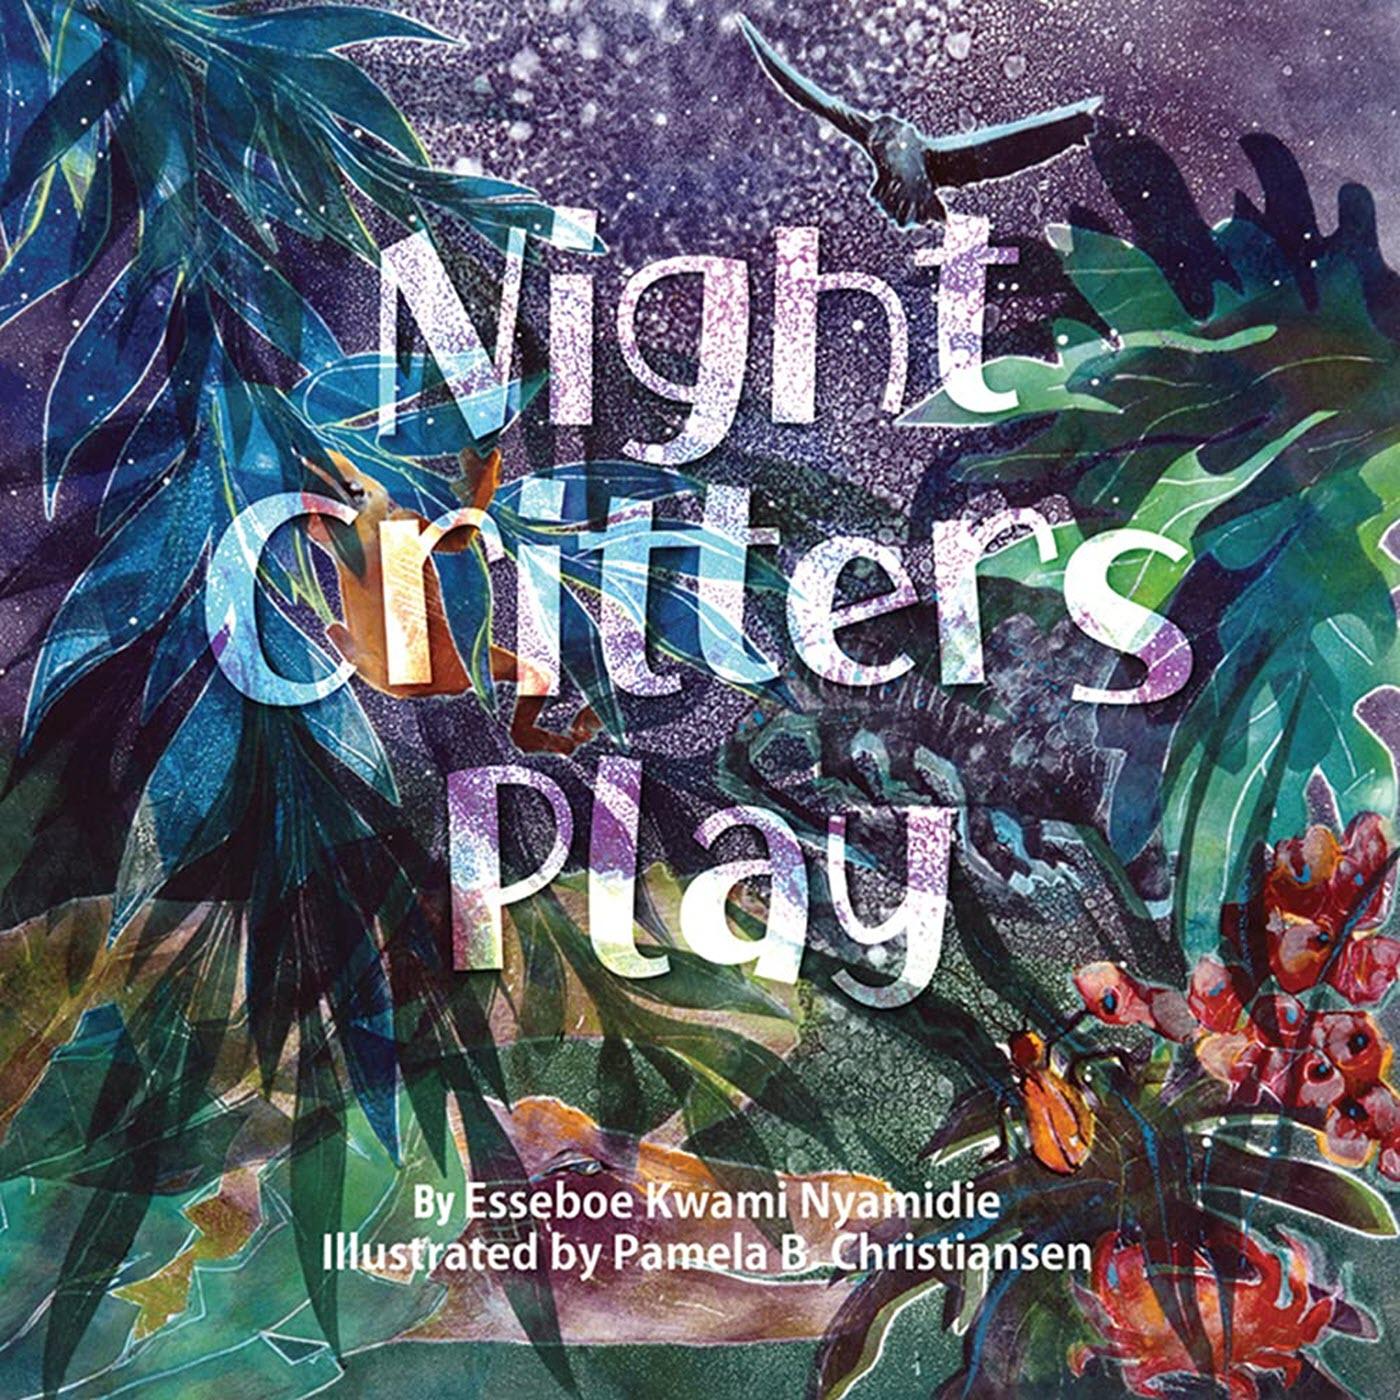 Night Critters Play by Esseboe Kwami Nyamidie, a narrated children's book with 3d sound effects